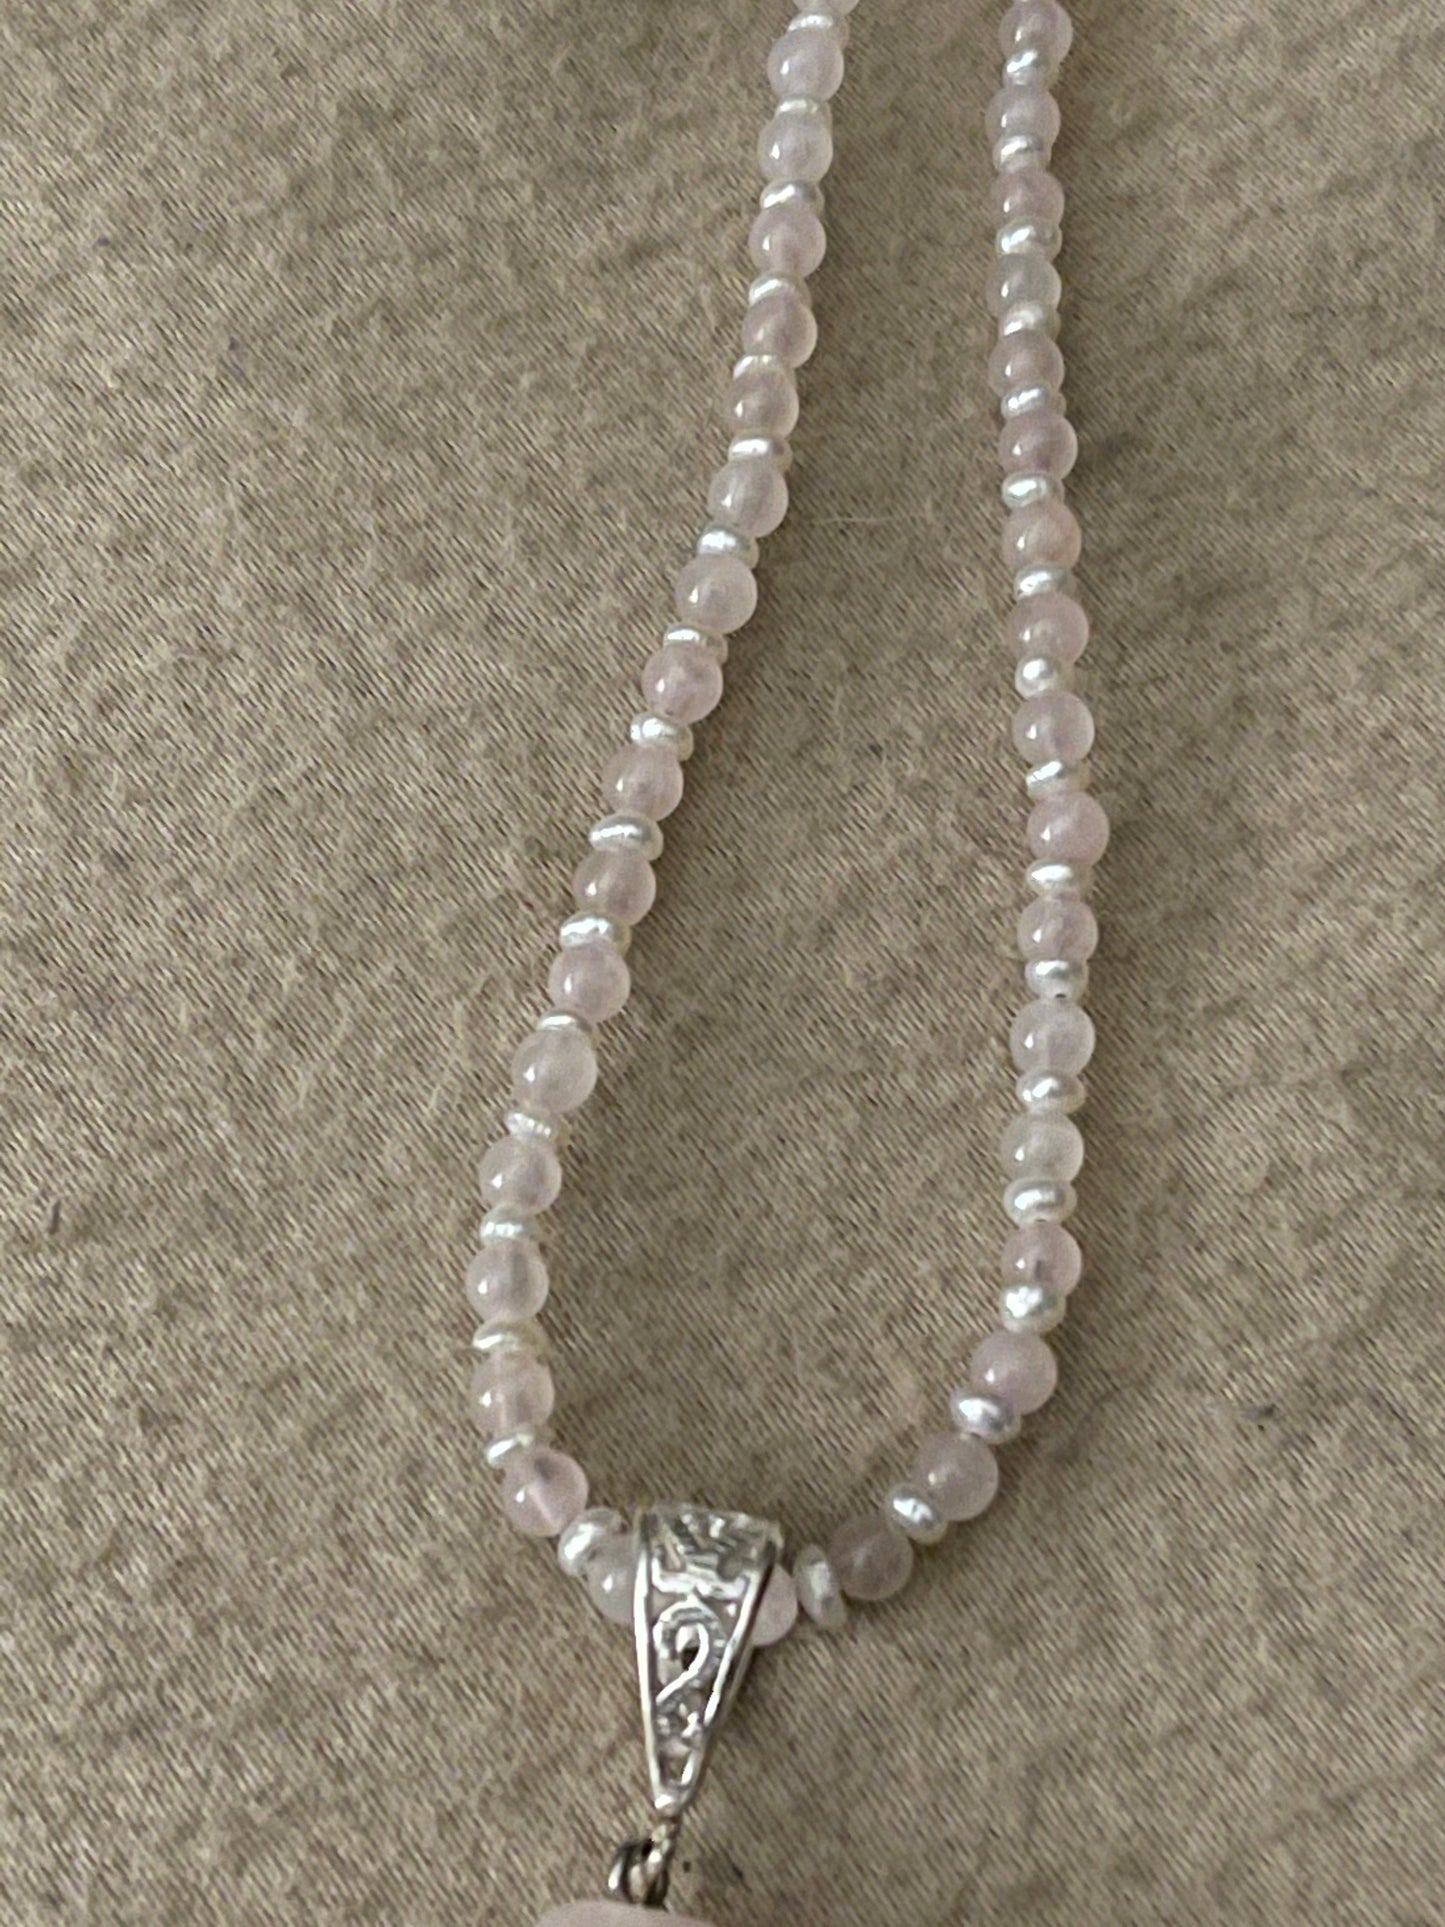 Rose Quartz and Freshwater Pearl Necklace